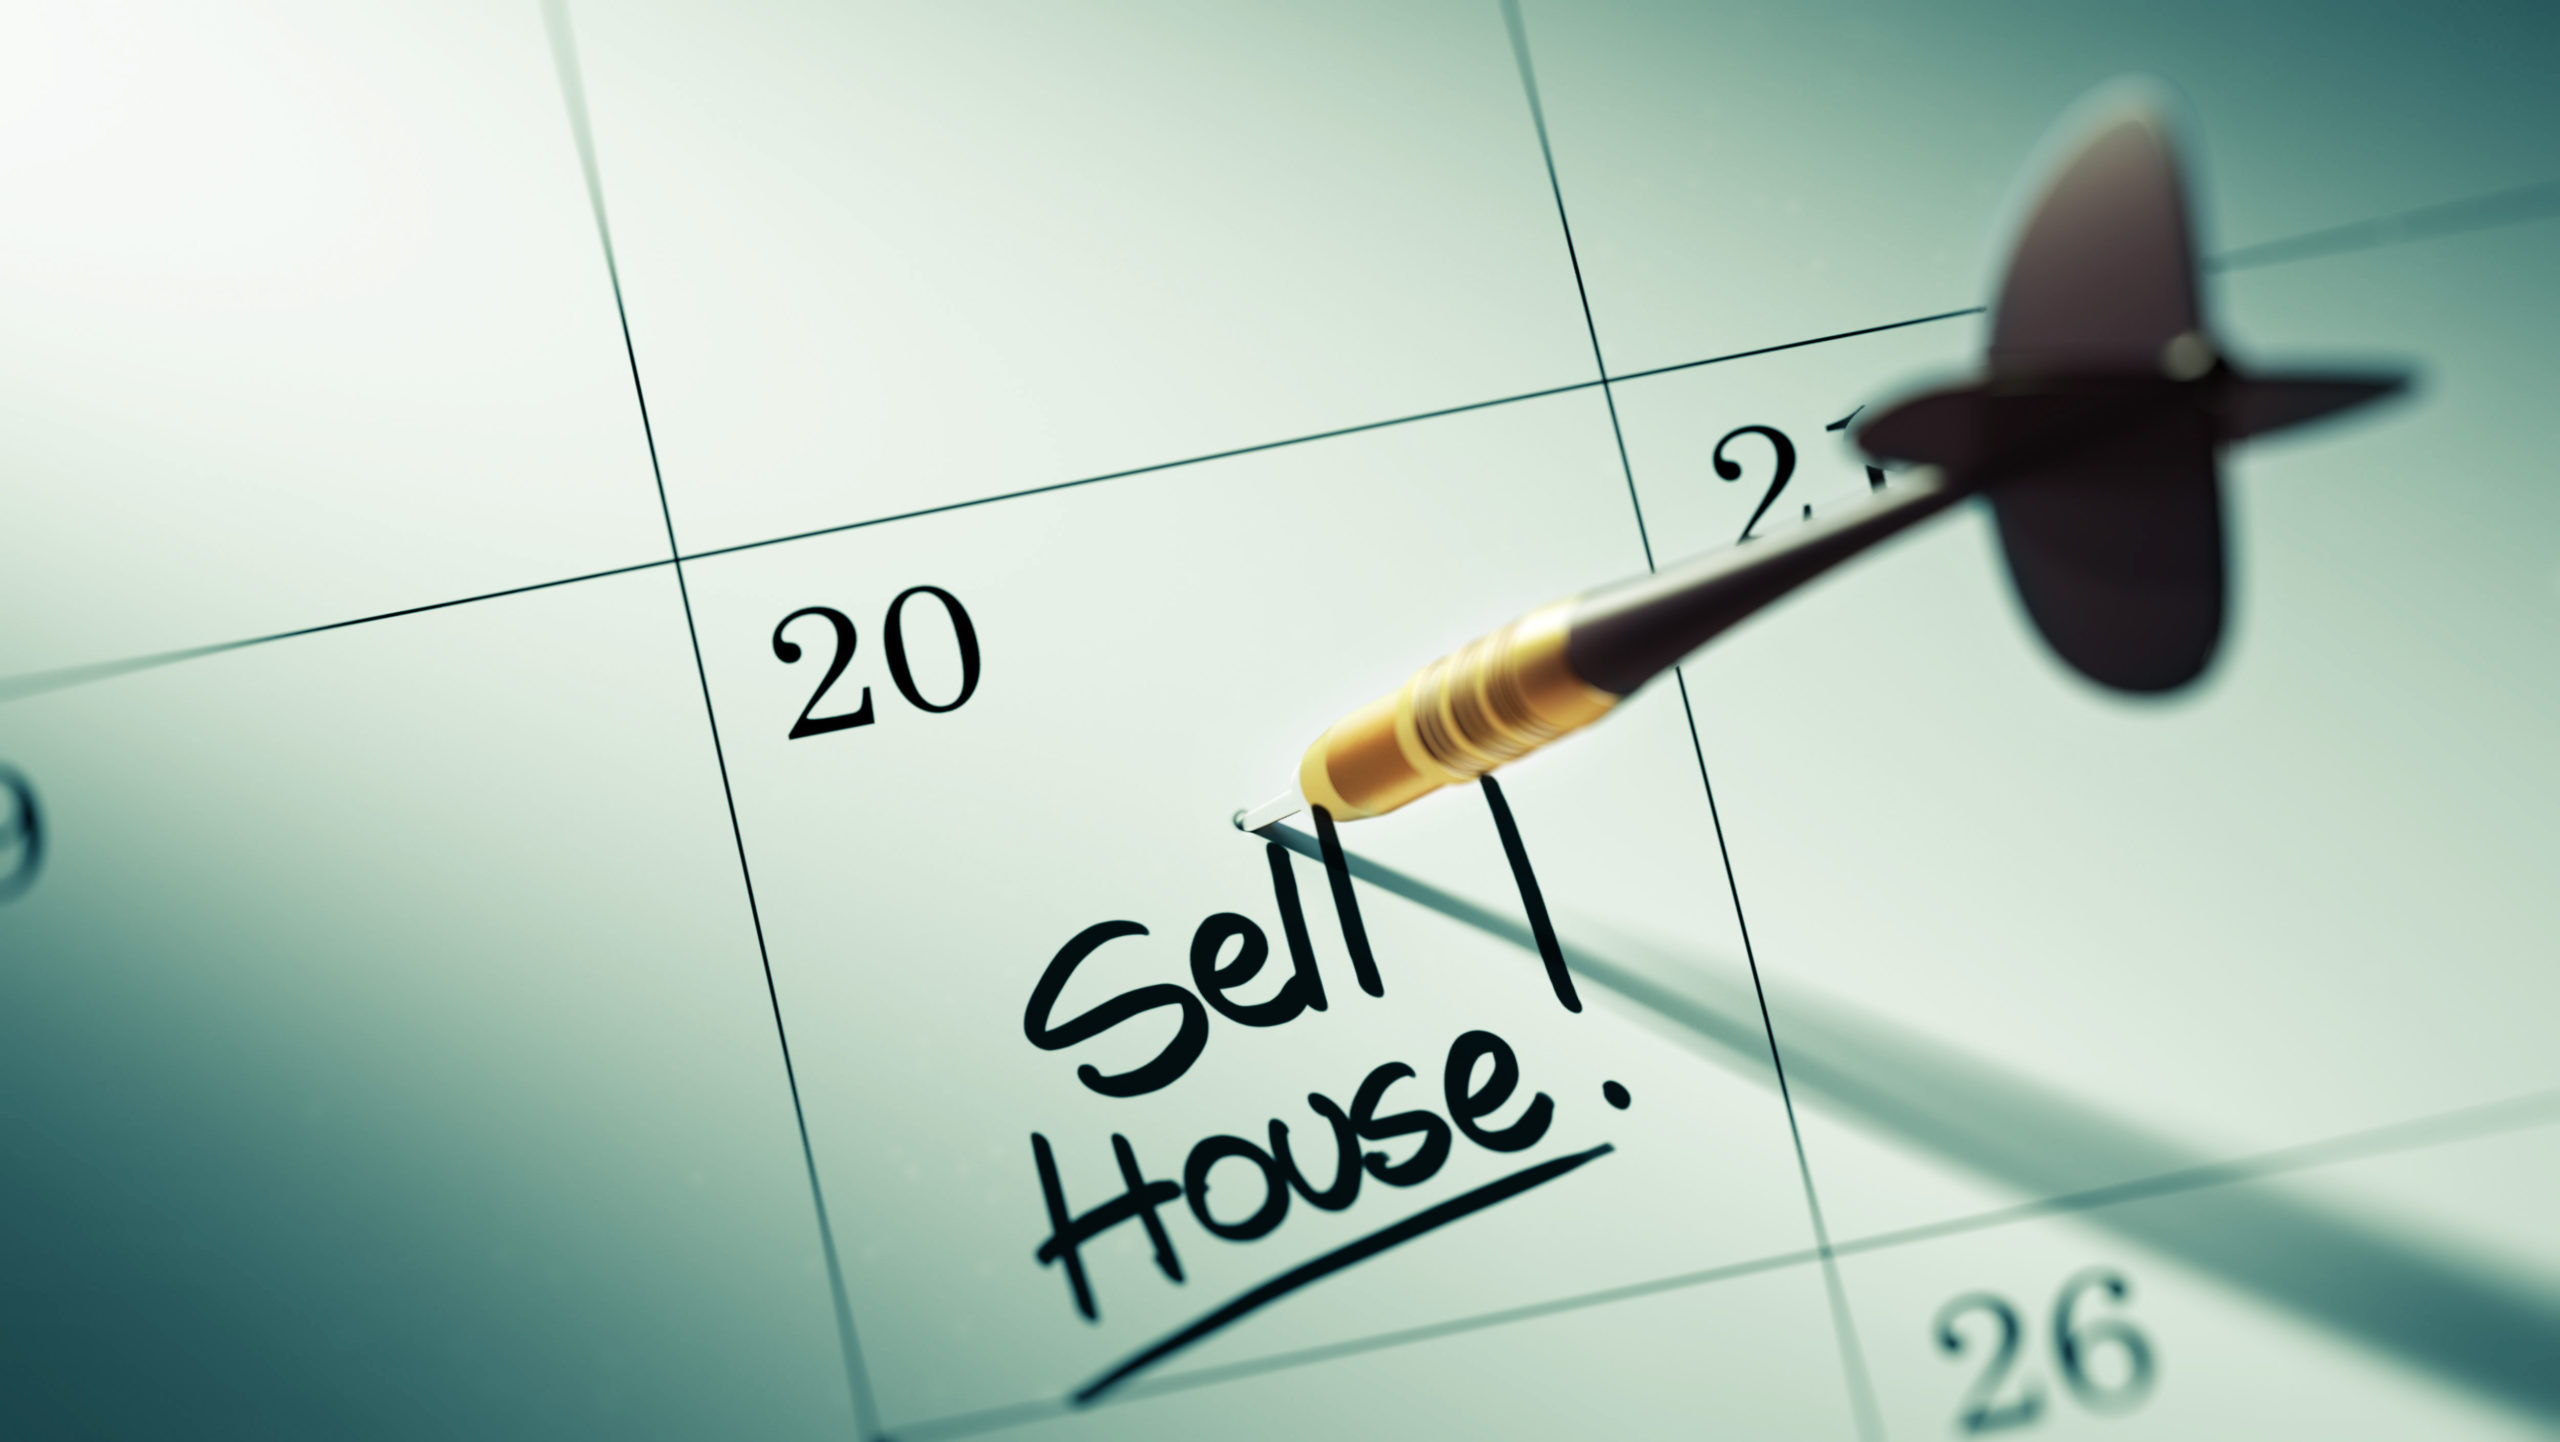 How To Sell Your House Fast With No Hassle